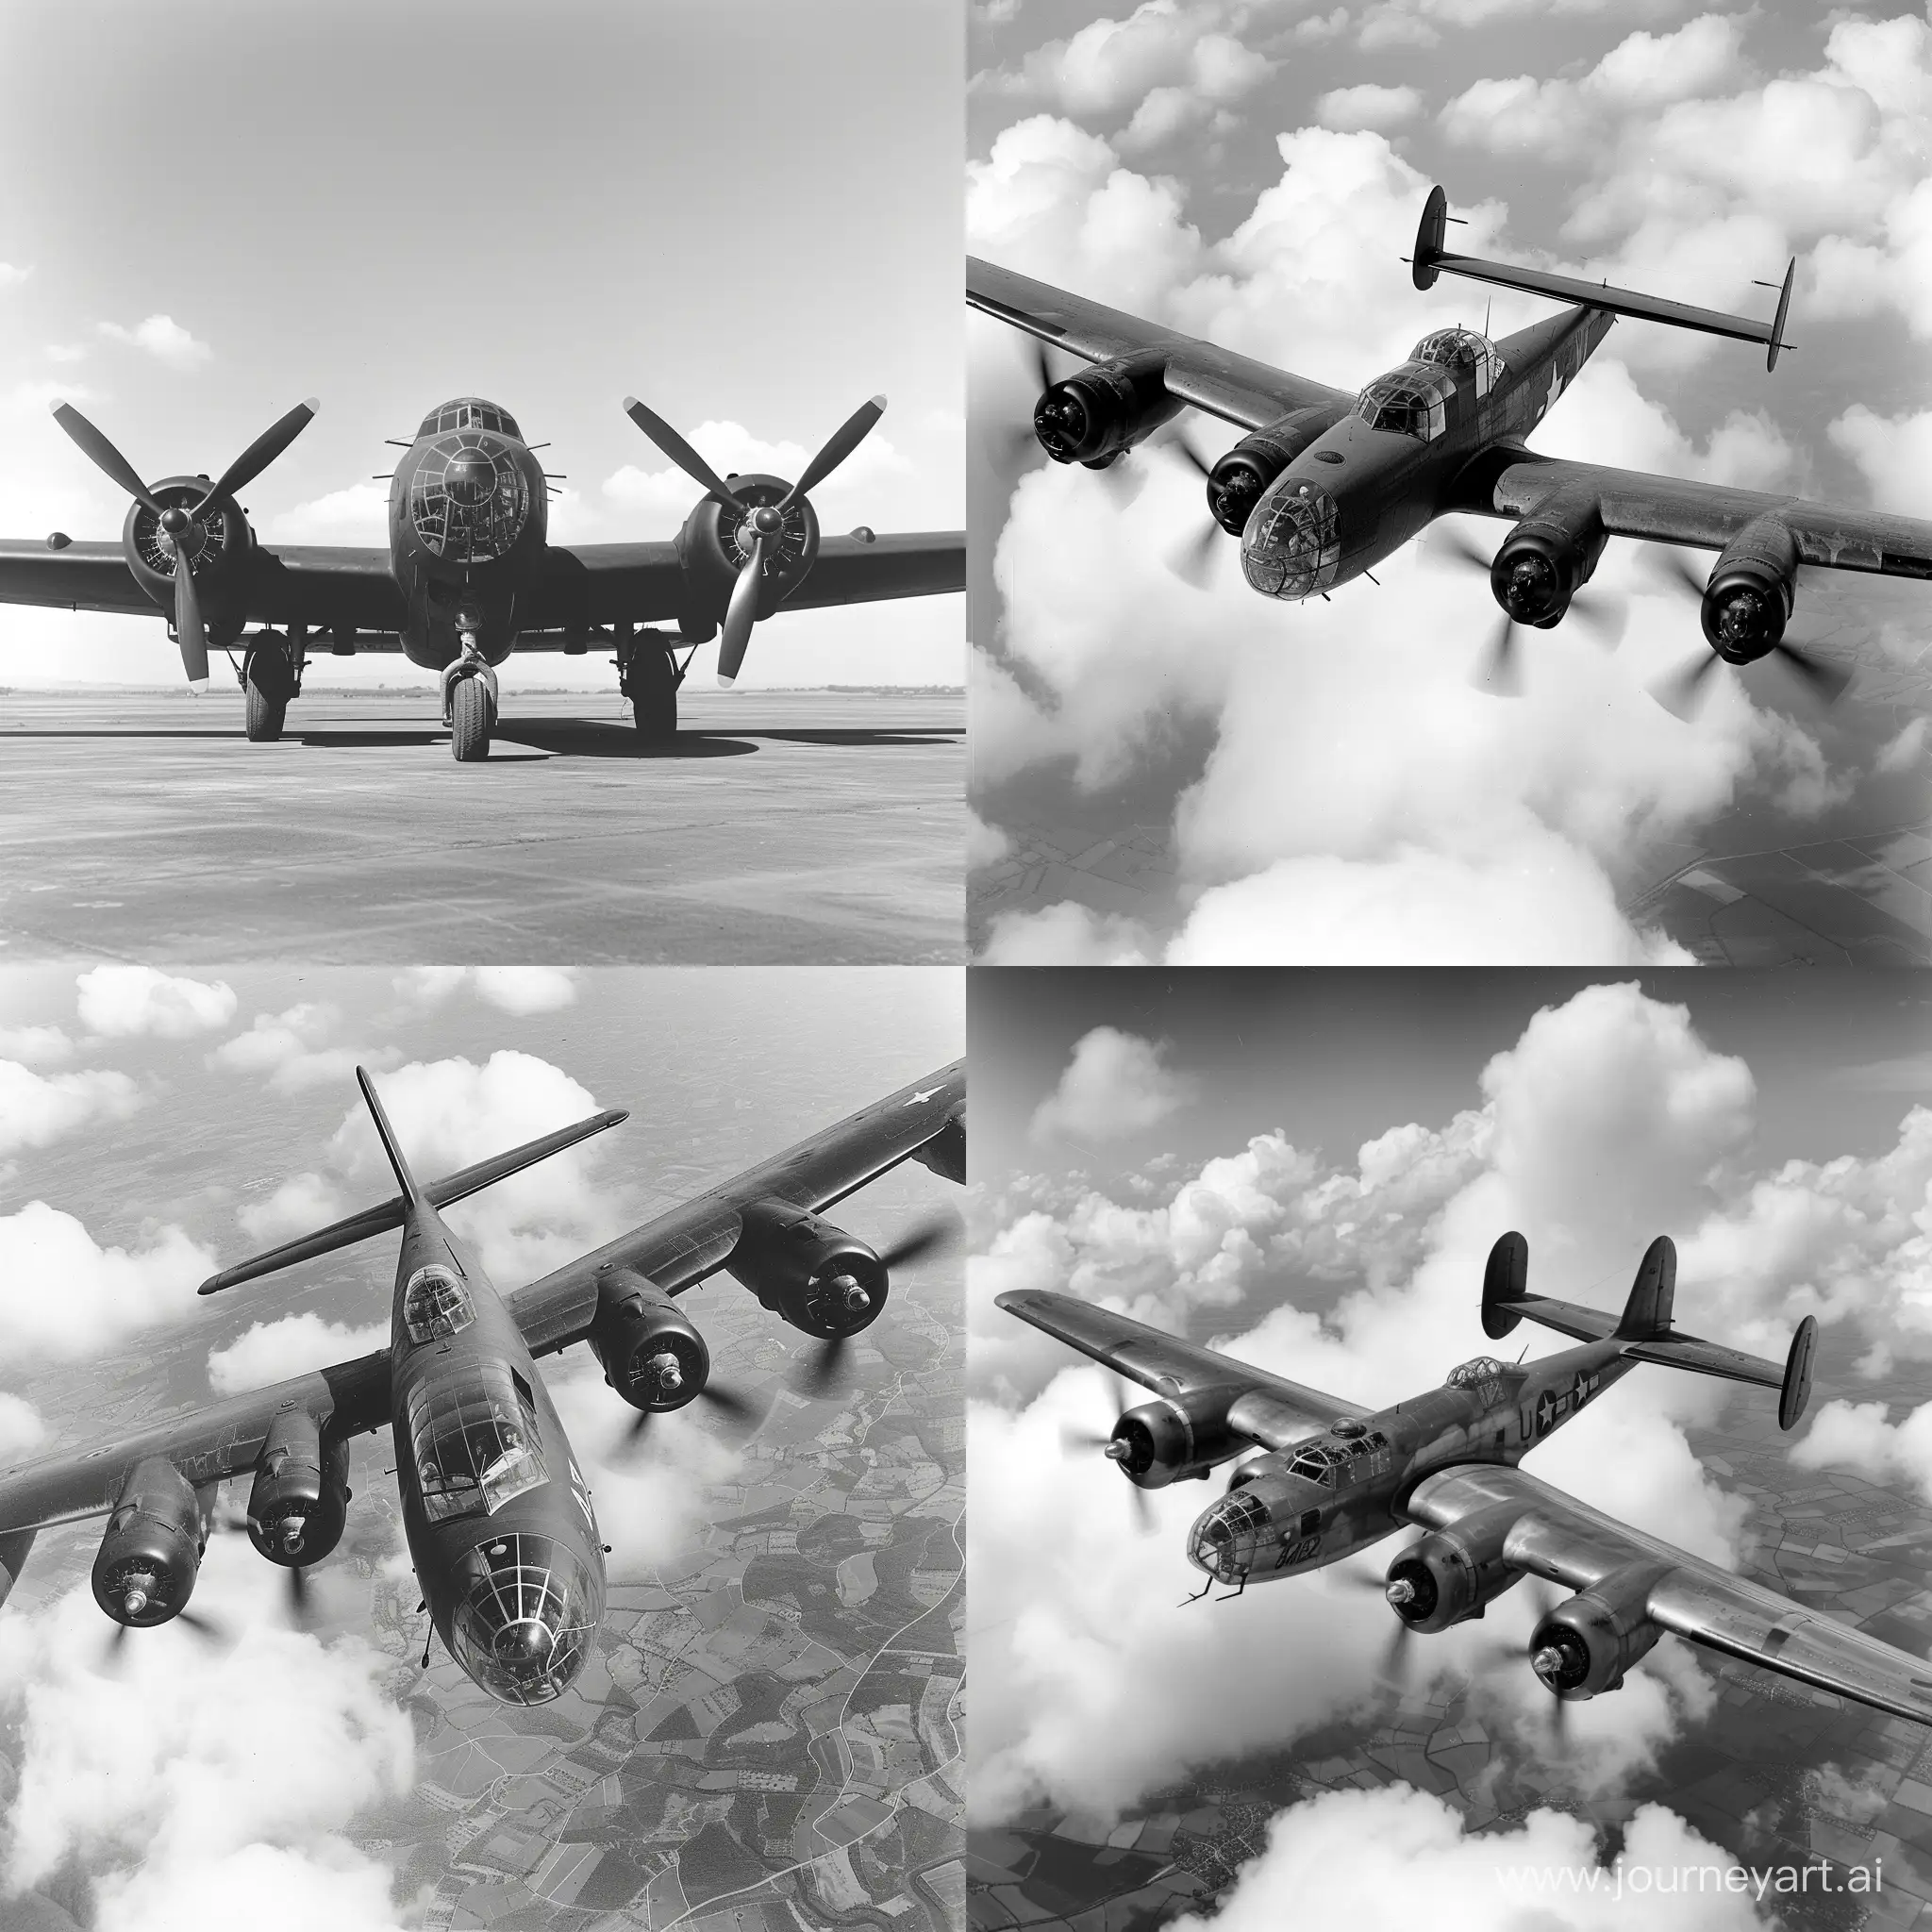 Vintage-Bomber-Aircraft-from-1935-in-a-Square-Art-Format